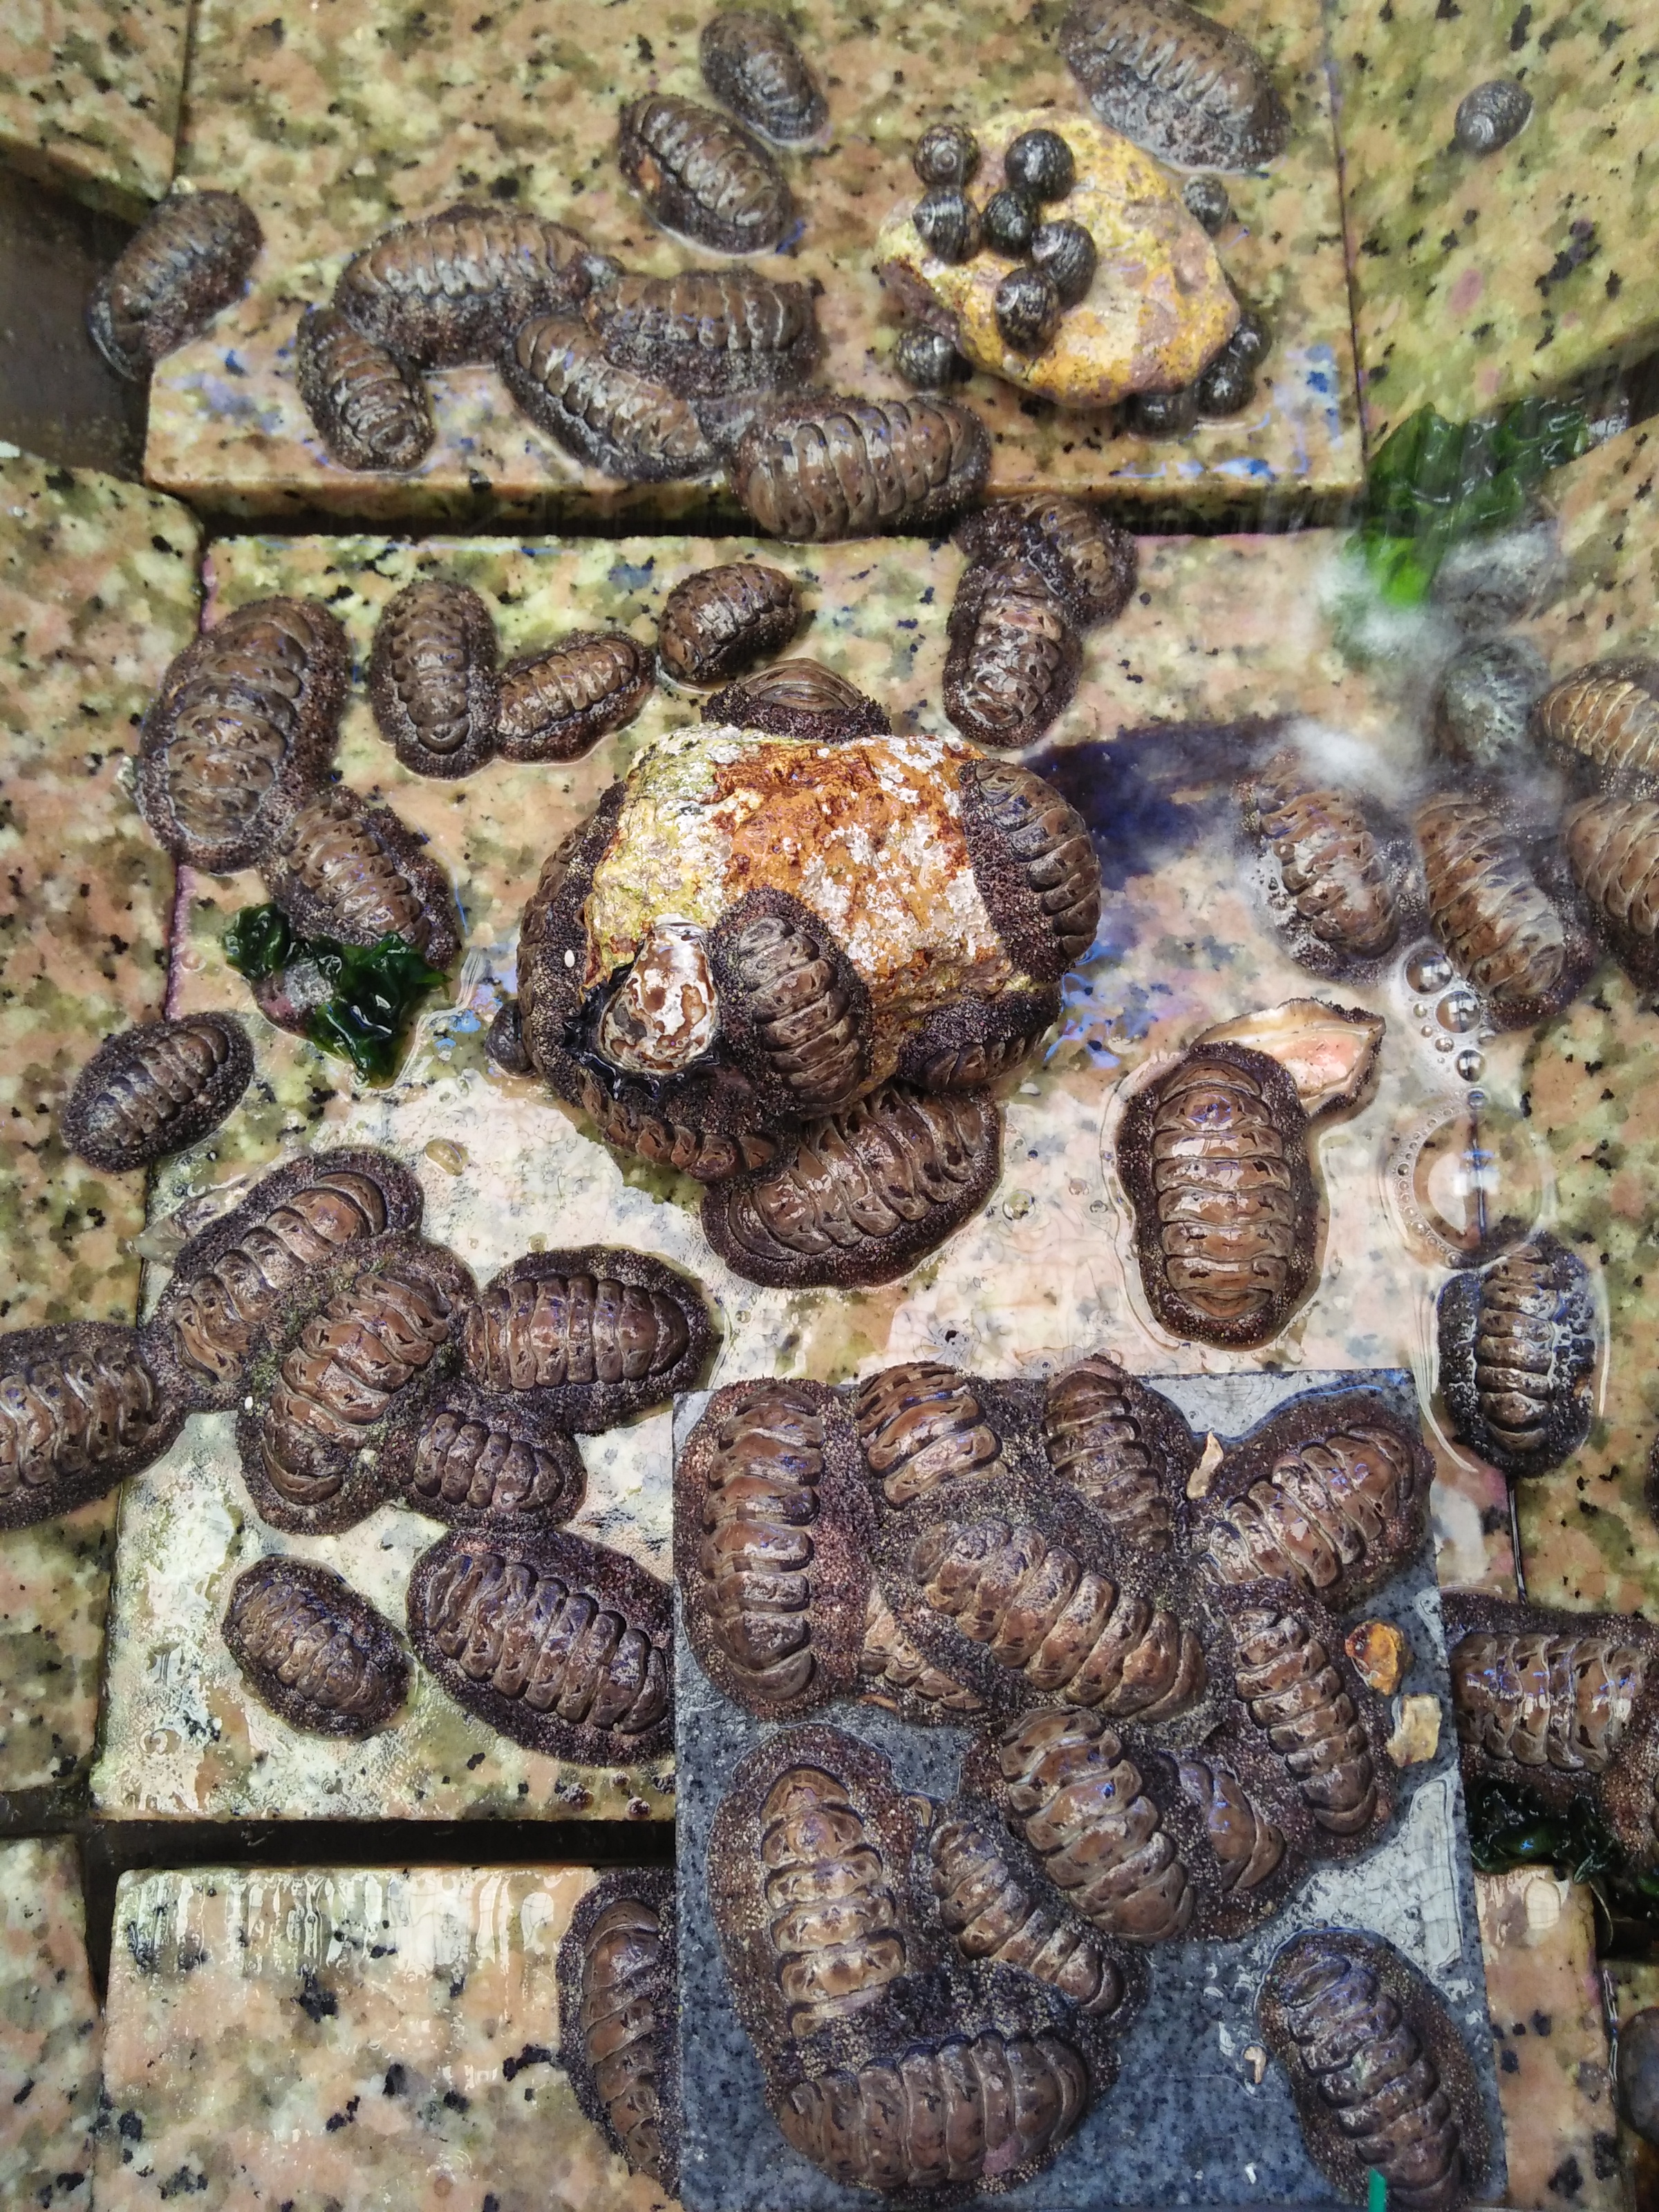 Fun with chitons